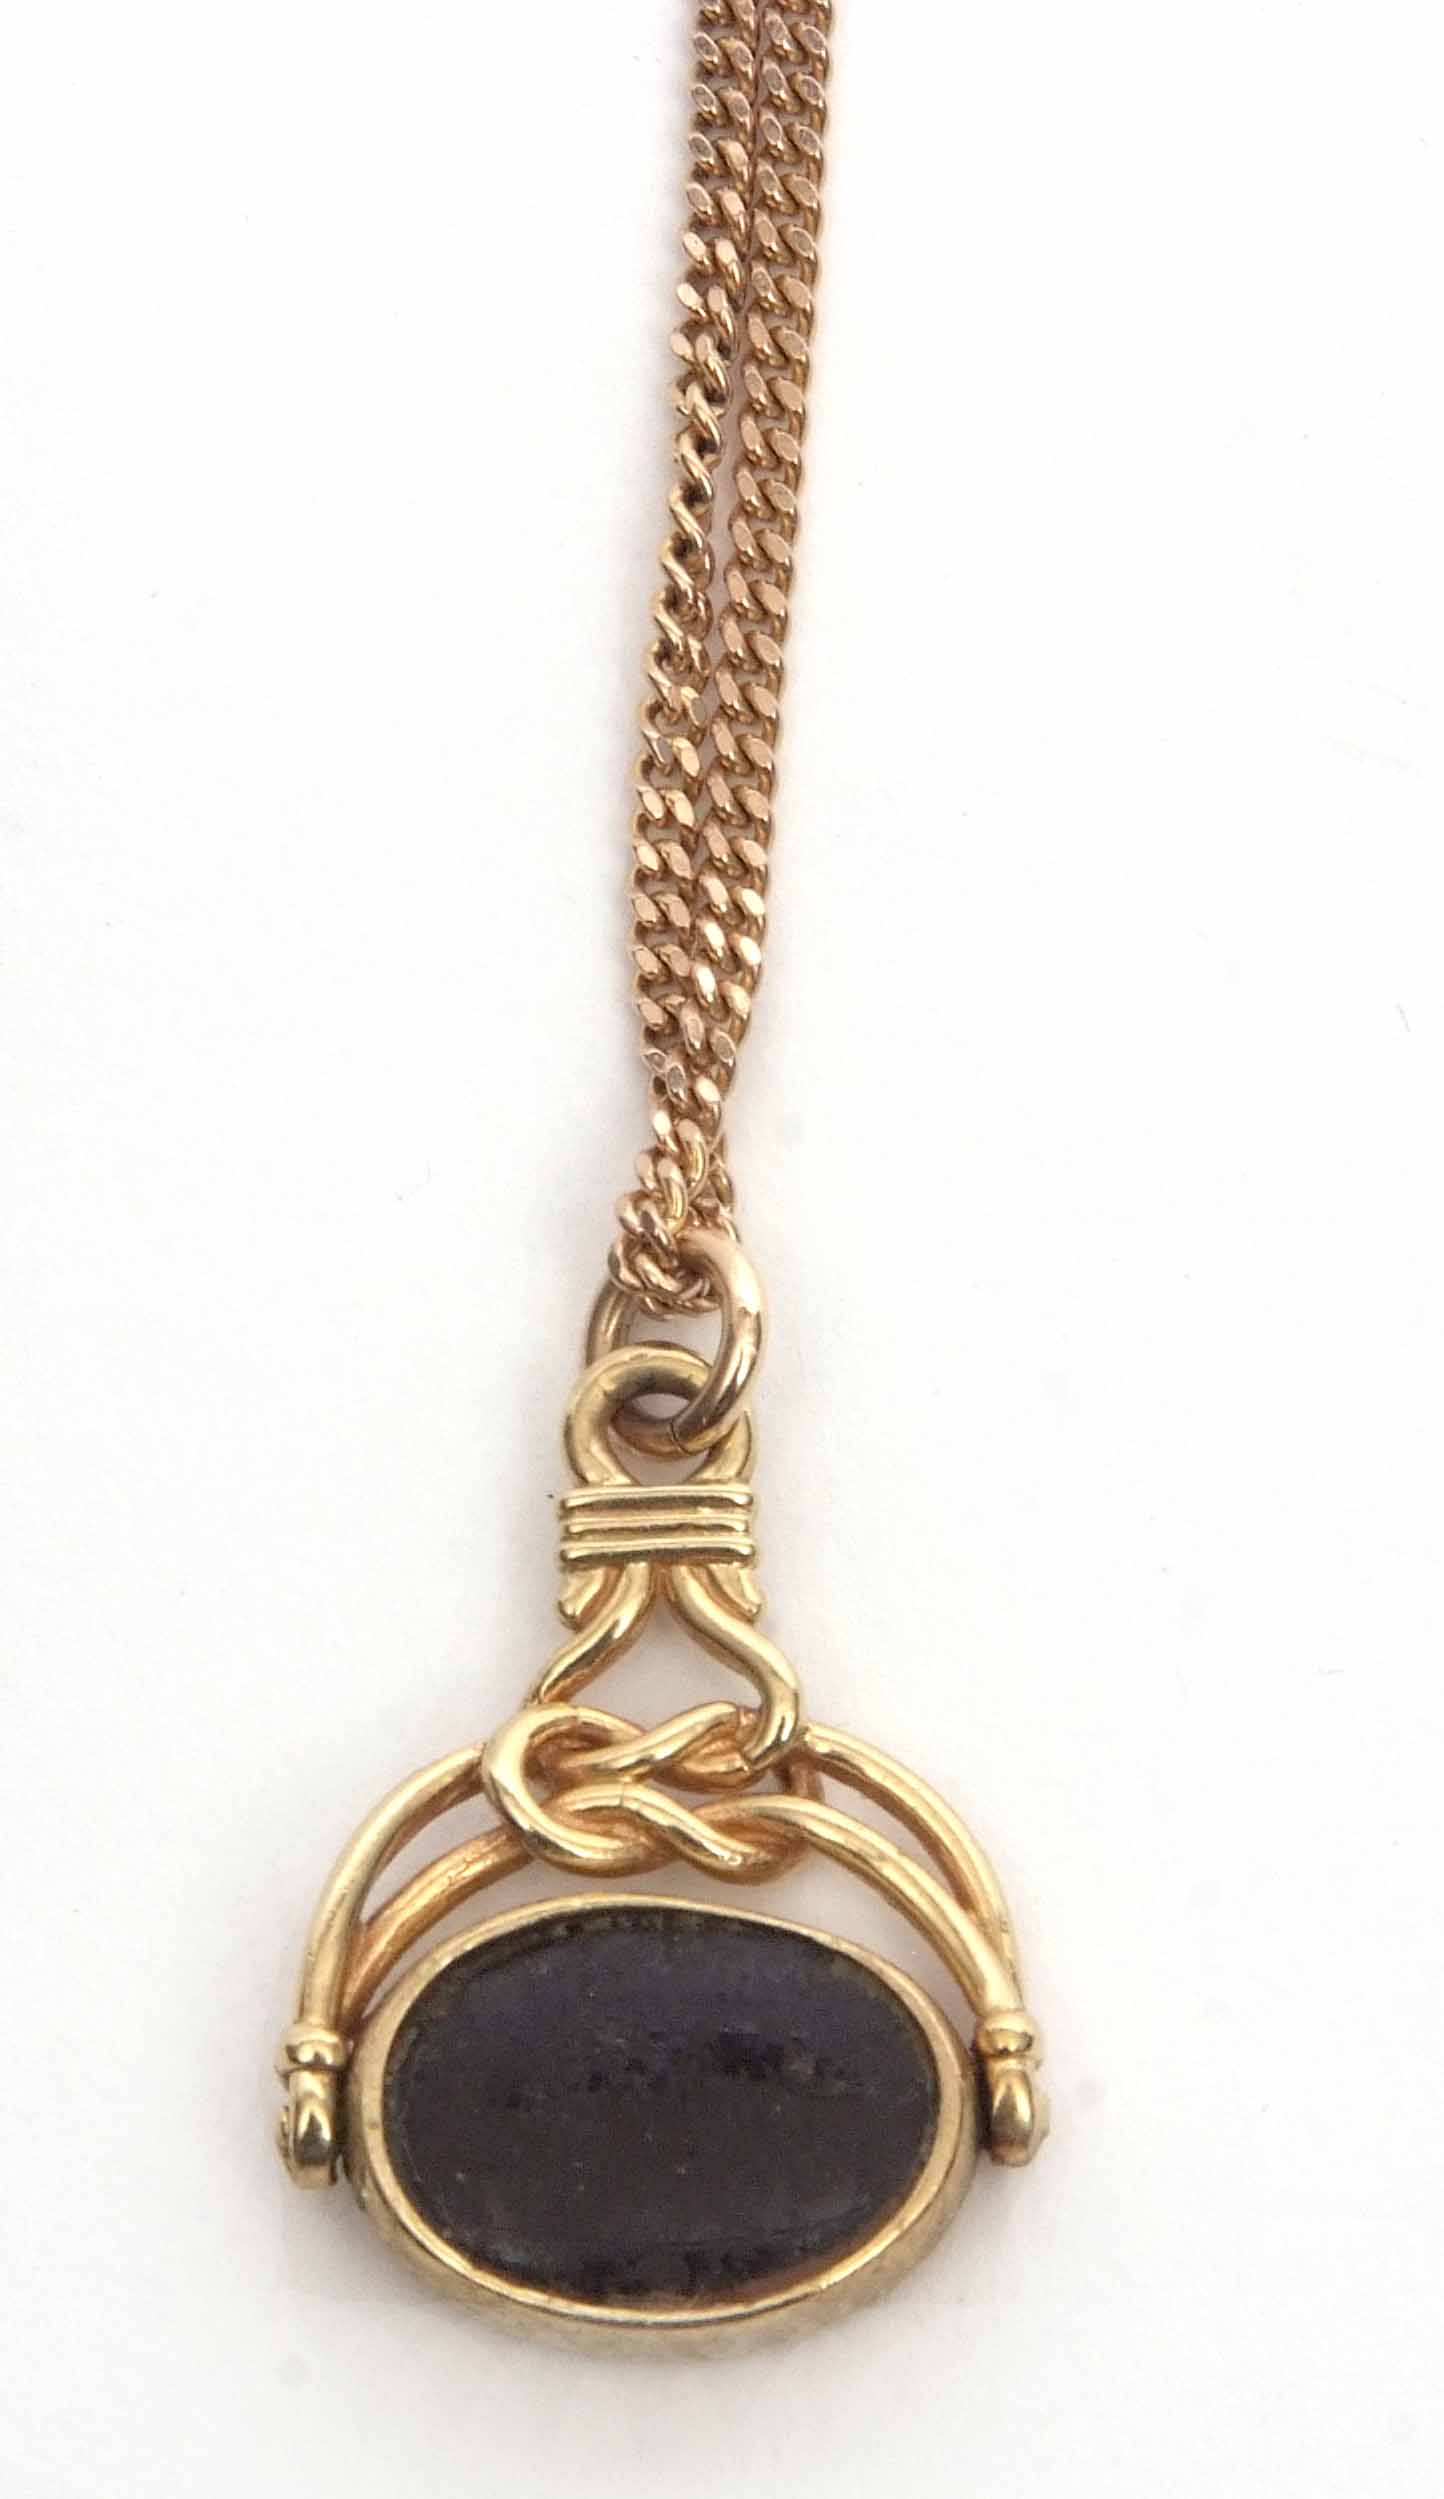 9ct gold framed swivel fob, oval shaped with a bloodstone and onyx panel, suspended from a filed - Image 2 of 3